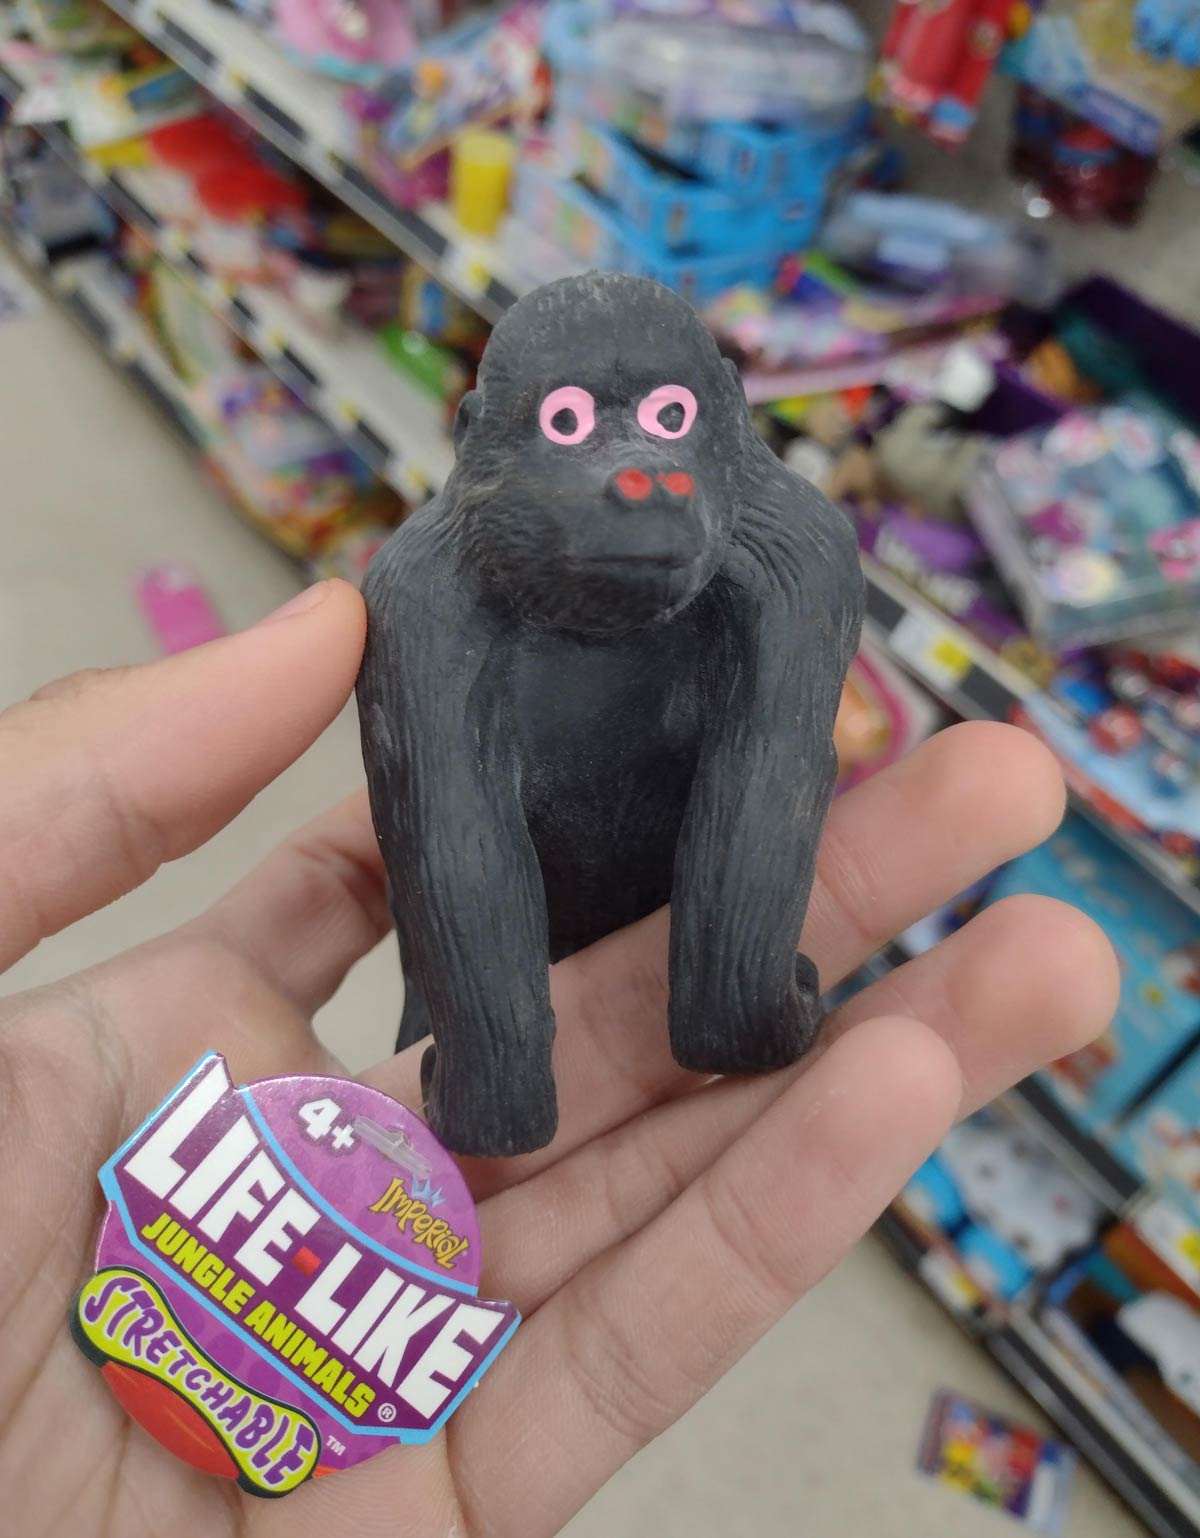 The latest in "Life-Like" toy gorillas